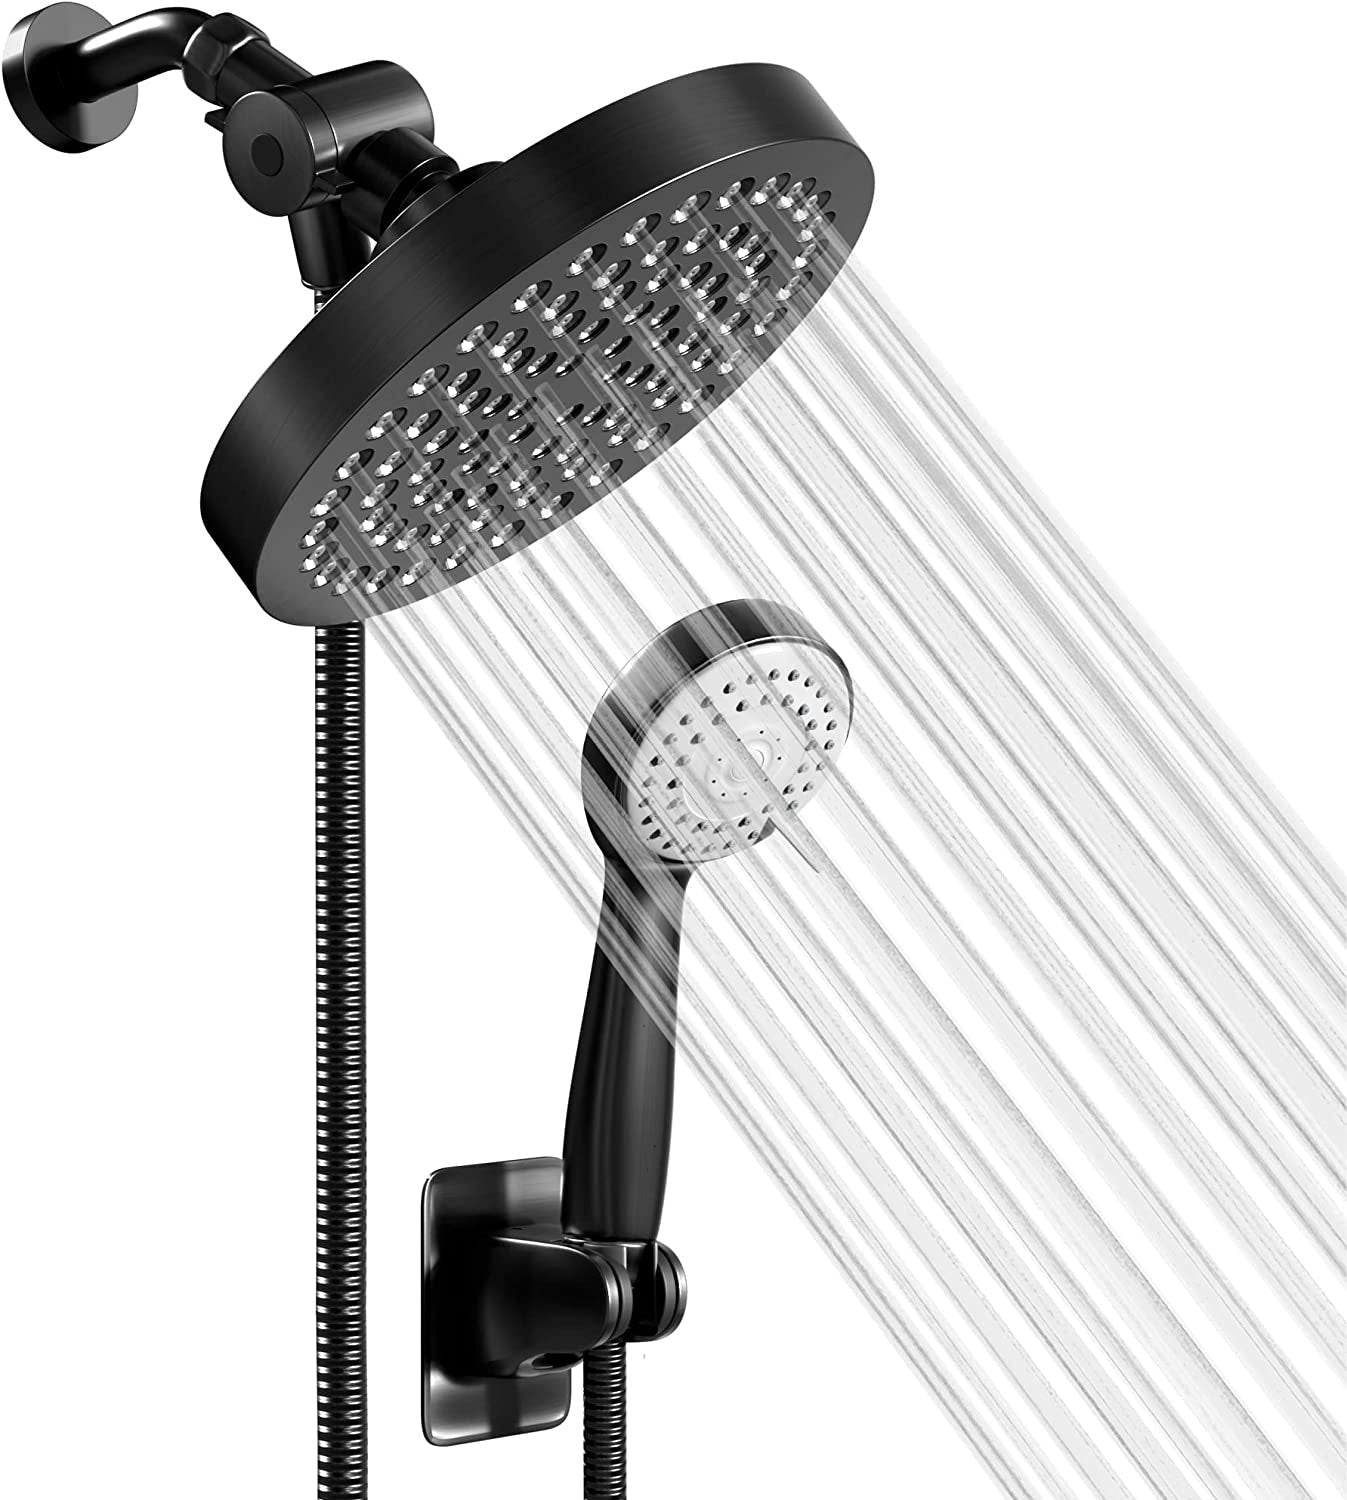 High Pressure Rainfall Shower Head and Hand Held Shower Head Combo with 70 Inch Hose for Bath and Adjustable Swivel Head - Easy Install Anti Clog Jet Nozzles (Brush Nickel)